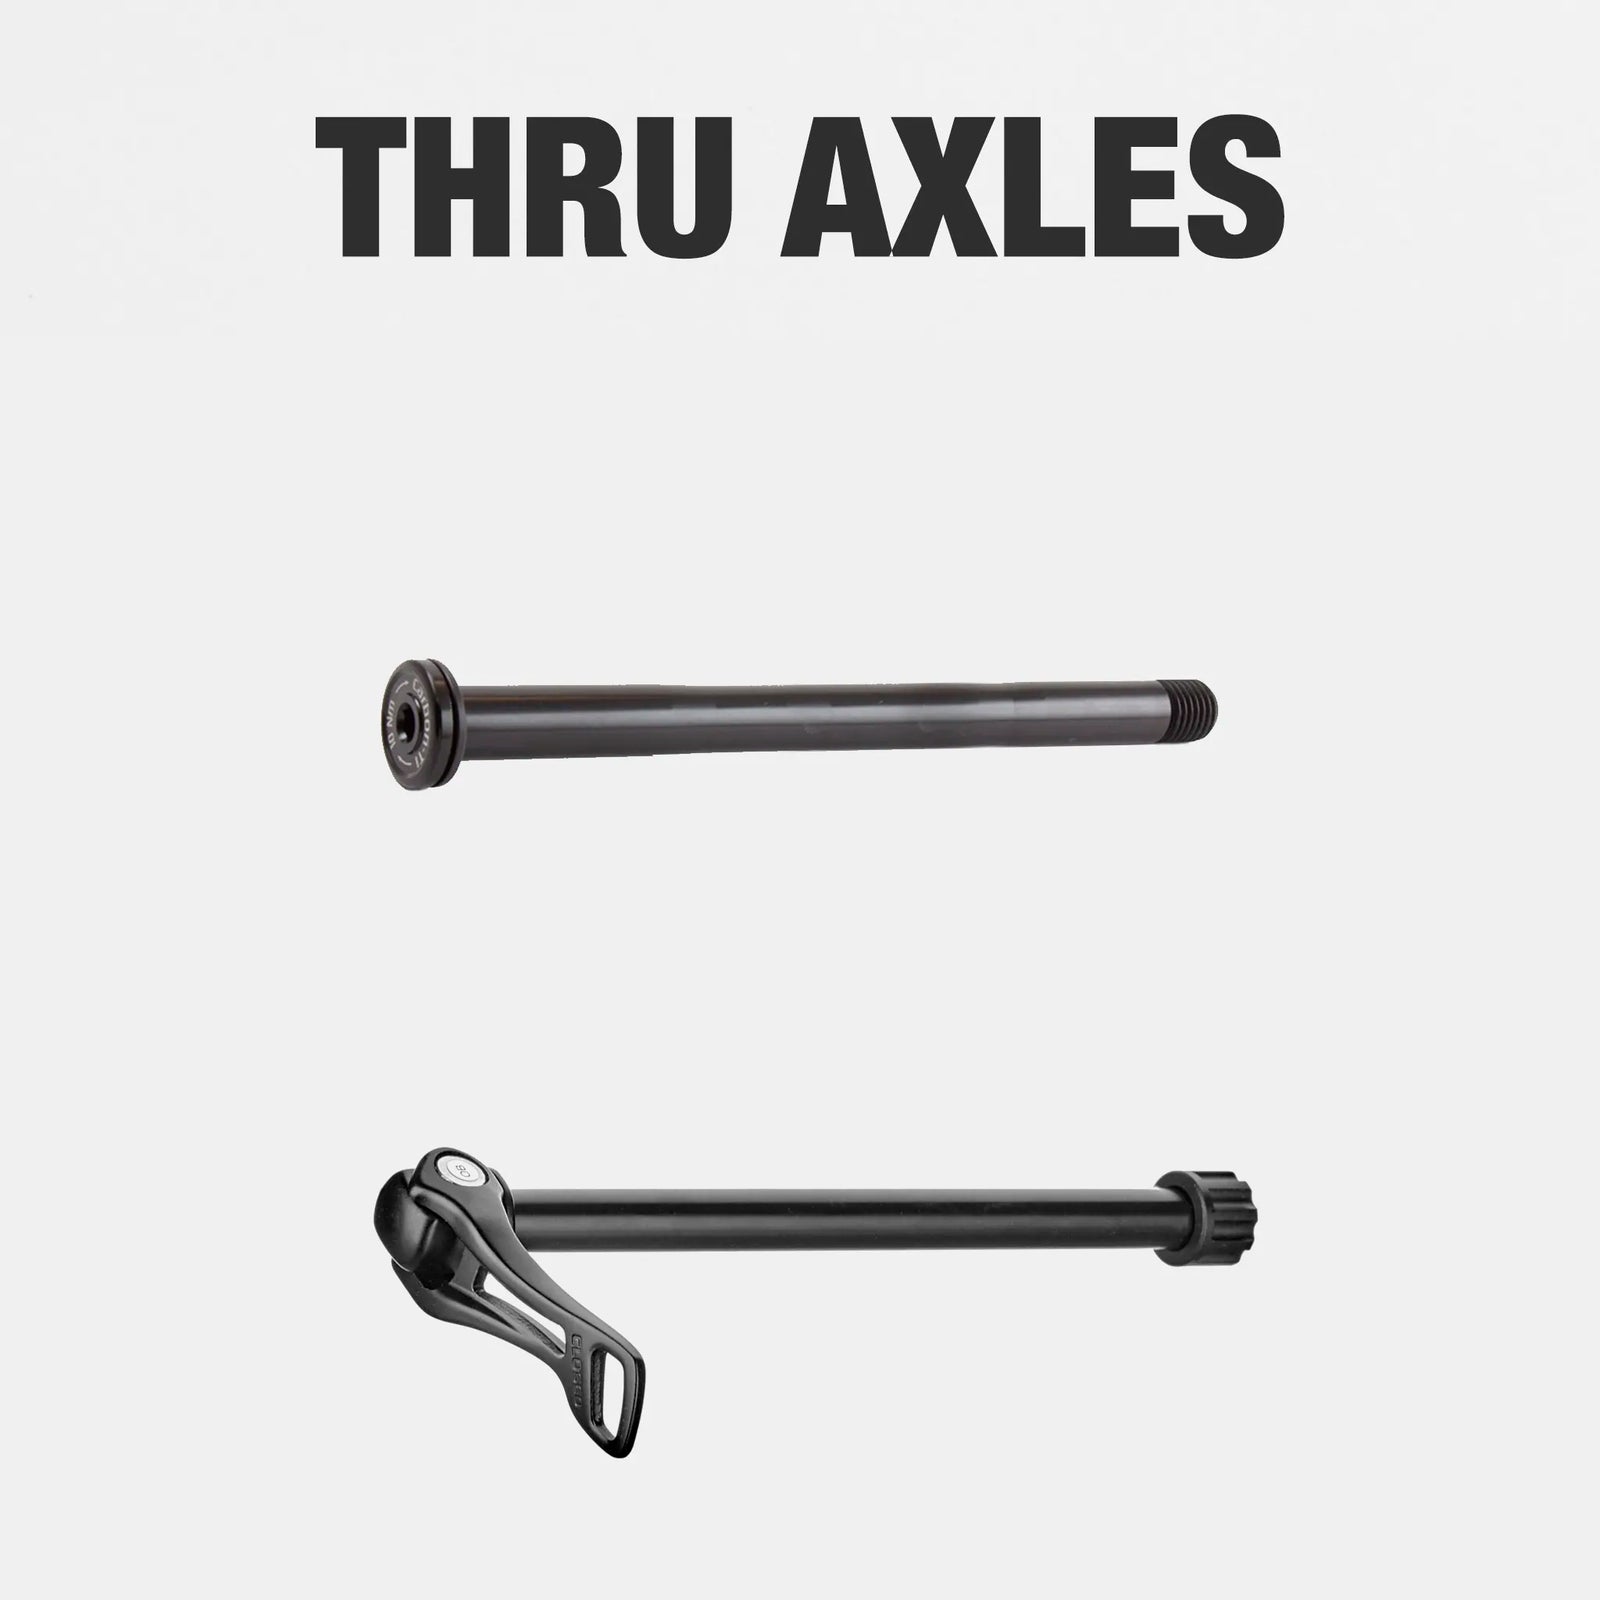 Axles move differently on a job